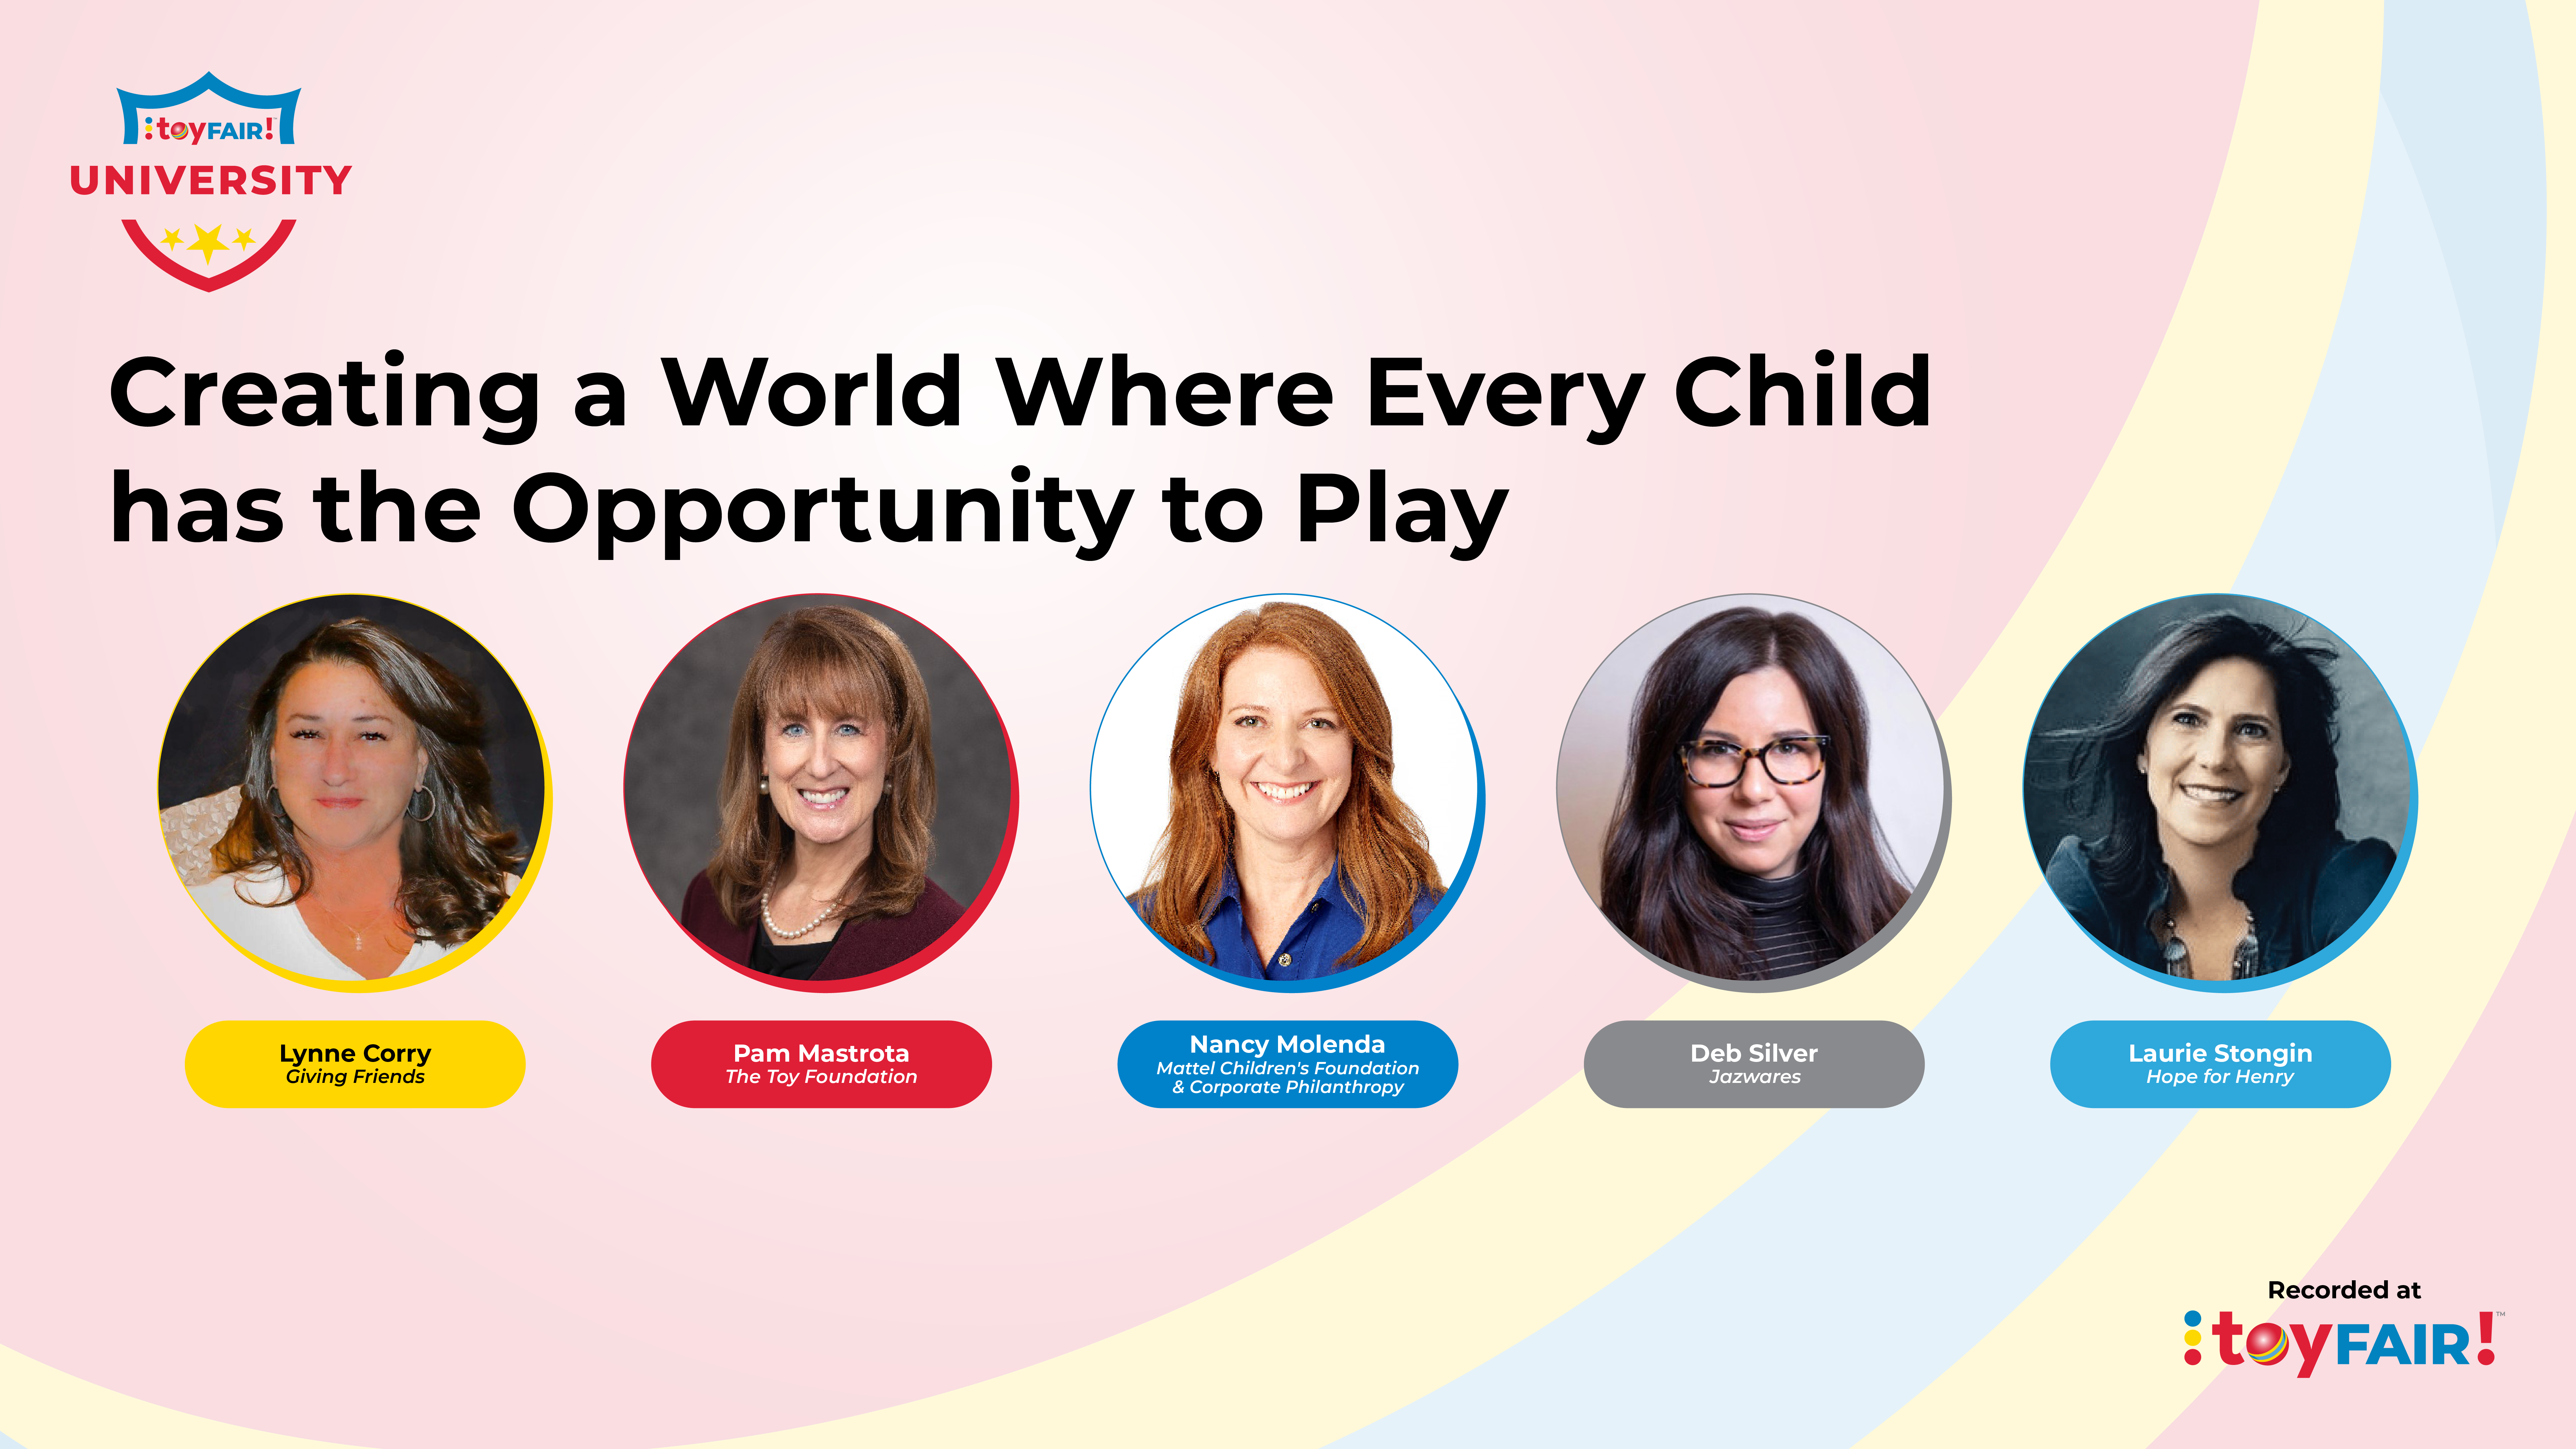 Creating a World Where Every Child has the Opportunity to Play